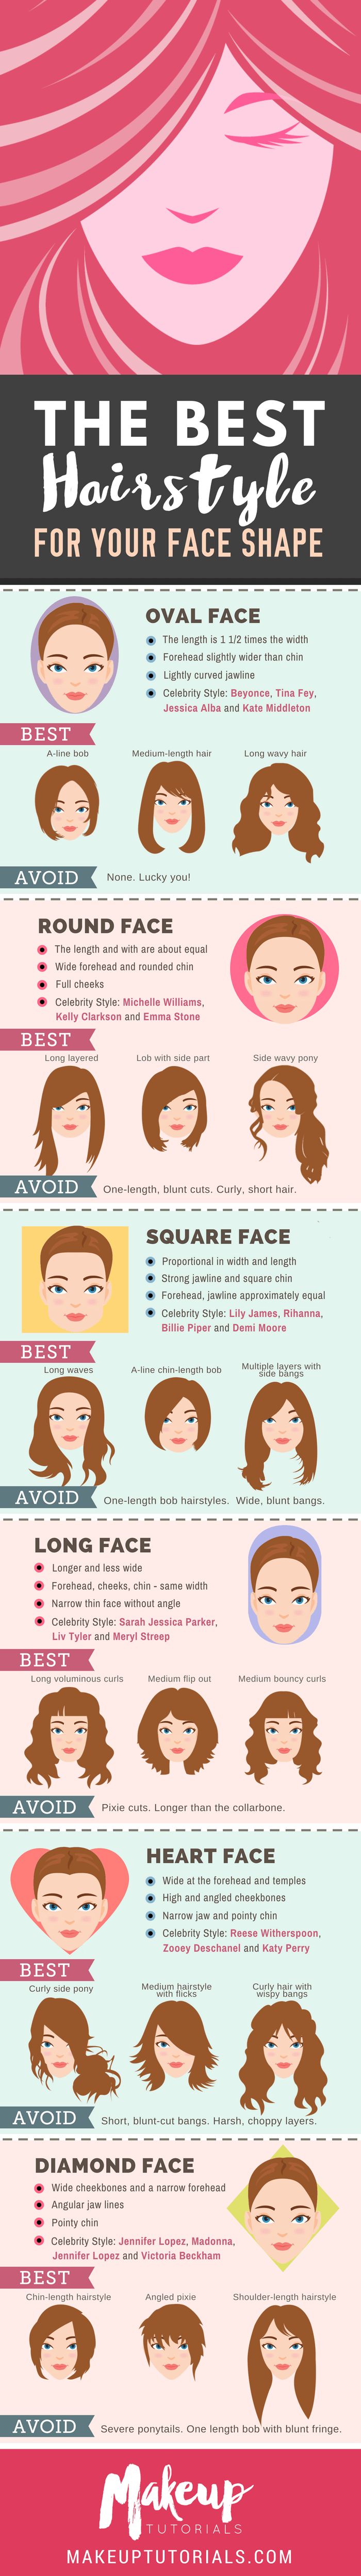 The Ultimate Hairstyle Guide For Your Face Shape | The Best Haircut for your Fac...